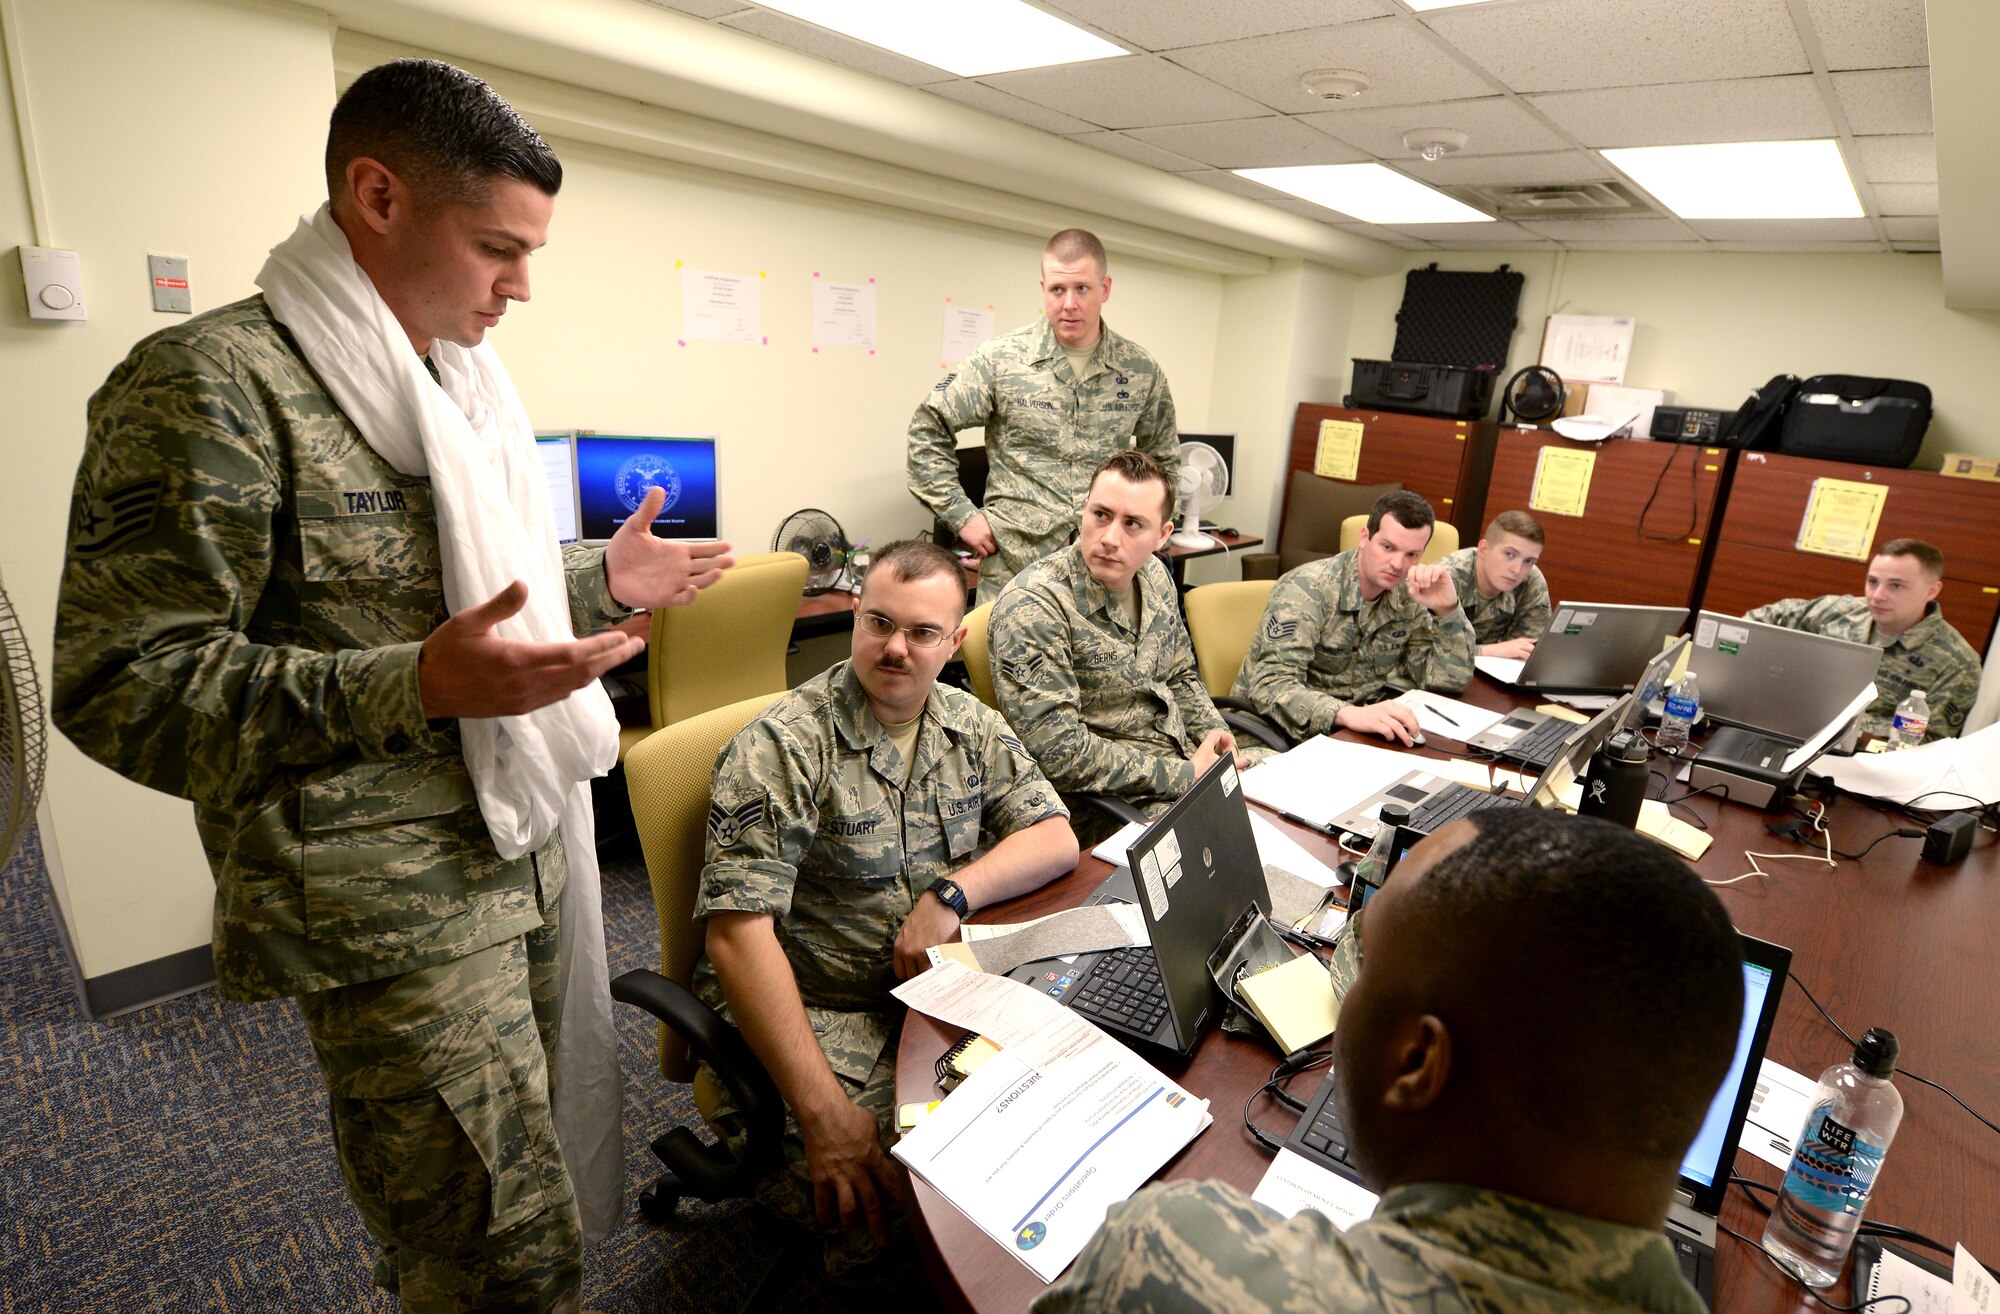 Staff Sgt. Brandon Taylor, 55th Contracting Squadron contract officer, provides guidance during a simulated payment discrepancy as part of a scenario used in a contracting contingency exercise May 10, 2017 at Offutt Air Force Base, Neb. The exercise lasted five days from May 8 – 12 and was designed to improve contracting readiness for bare base operations. (U.S. Air Force photo by Delanie Stafford)